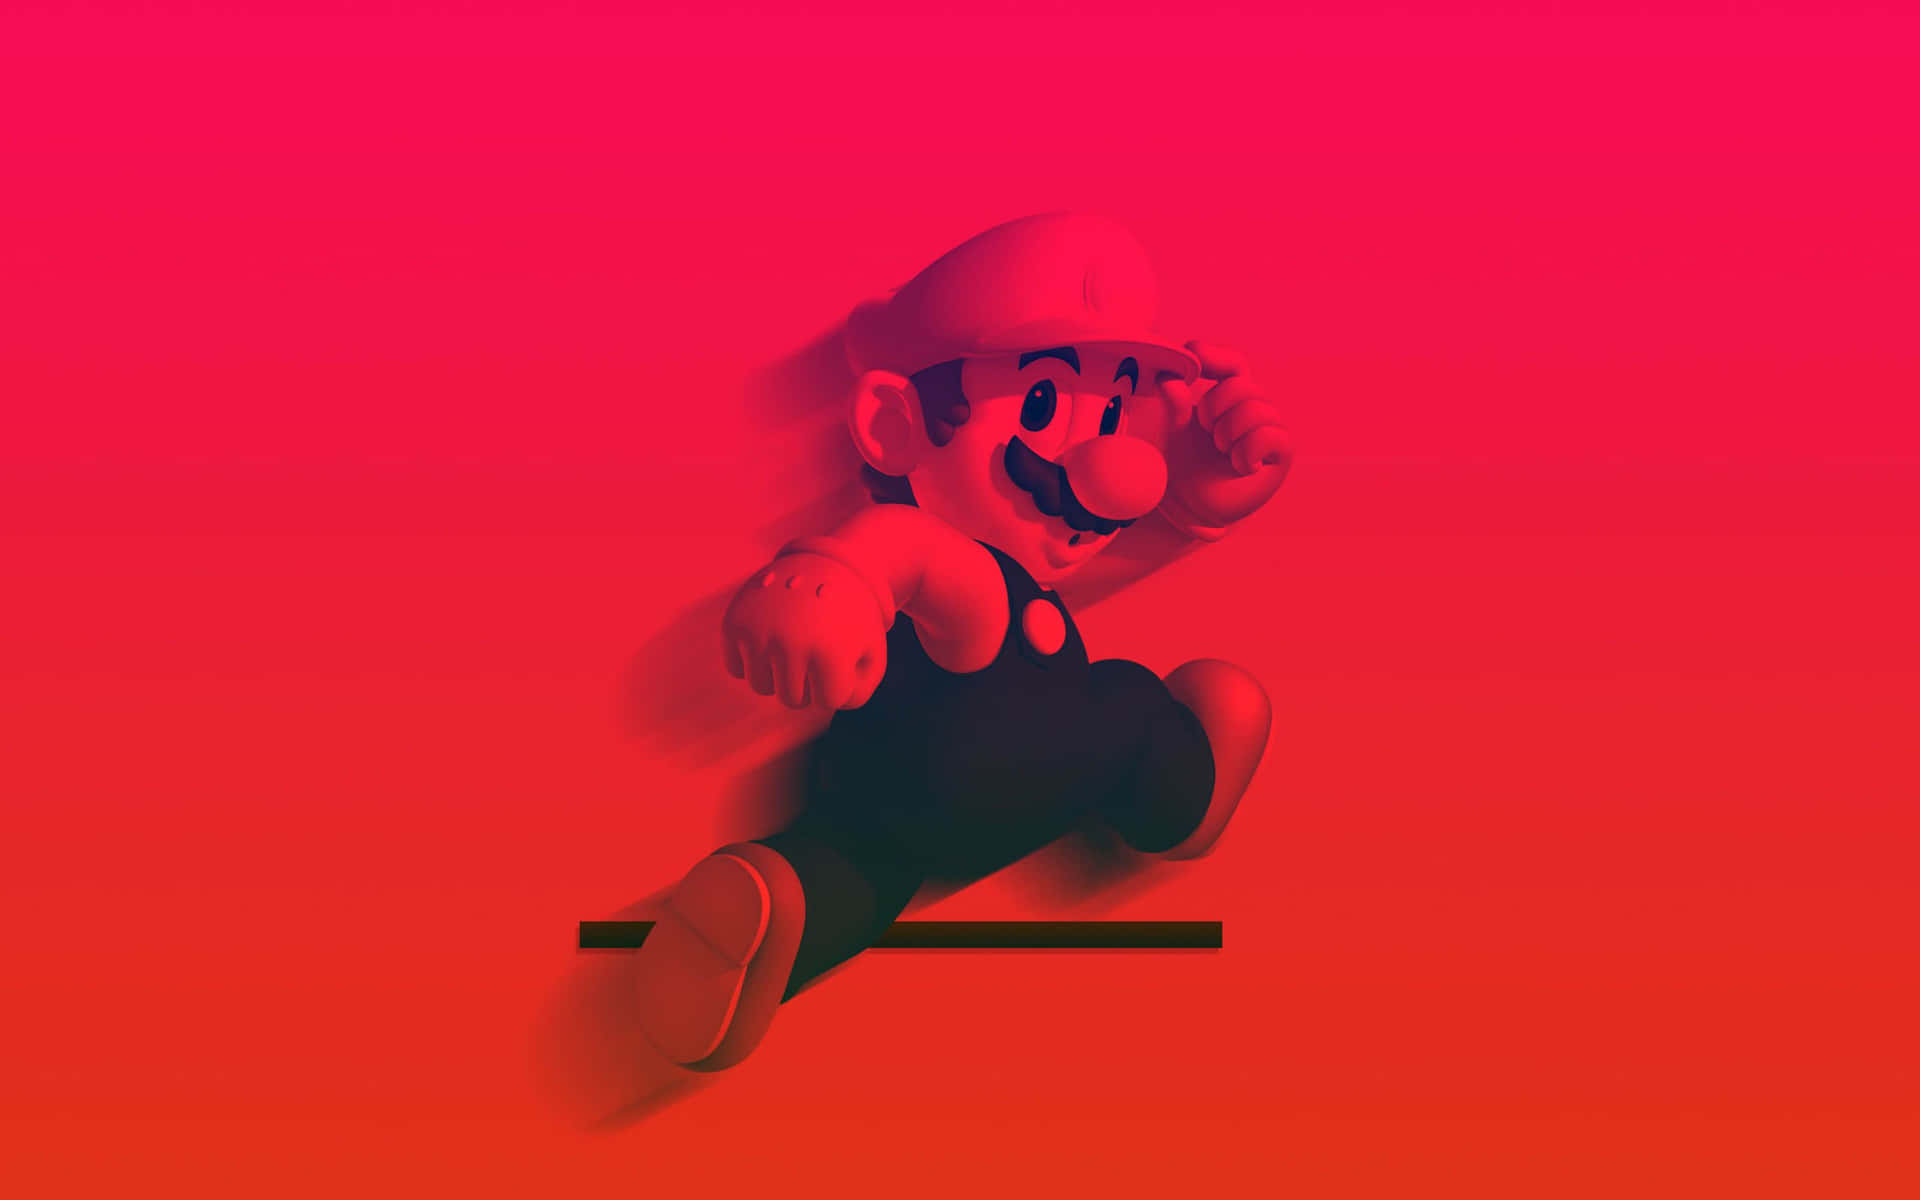 Get ready to explore the Mushroom Kingdom with Cool Mario! Wallpaper